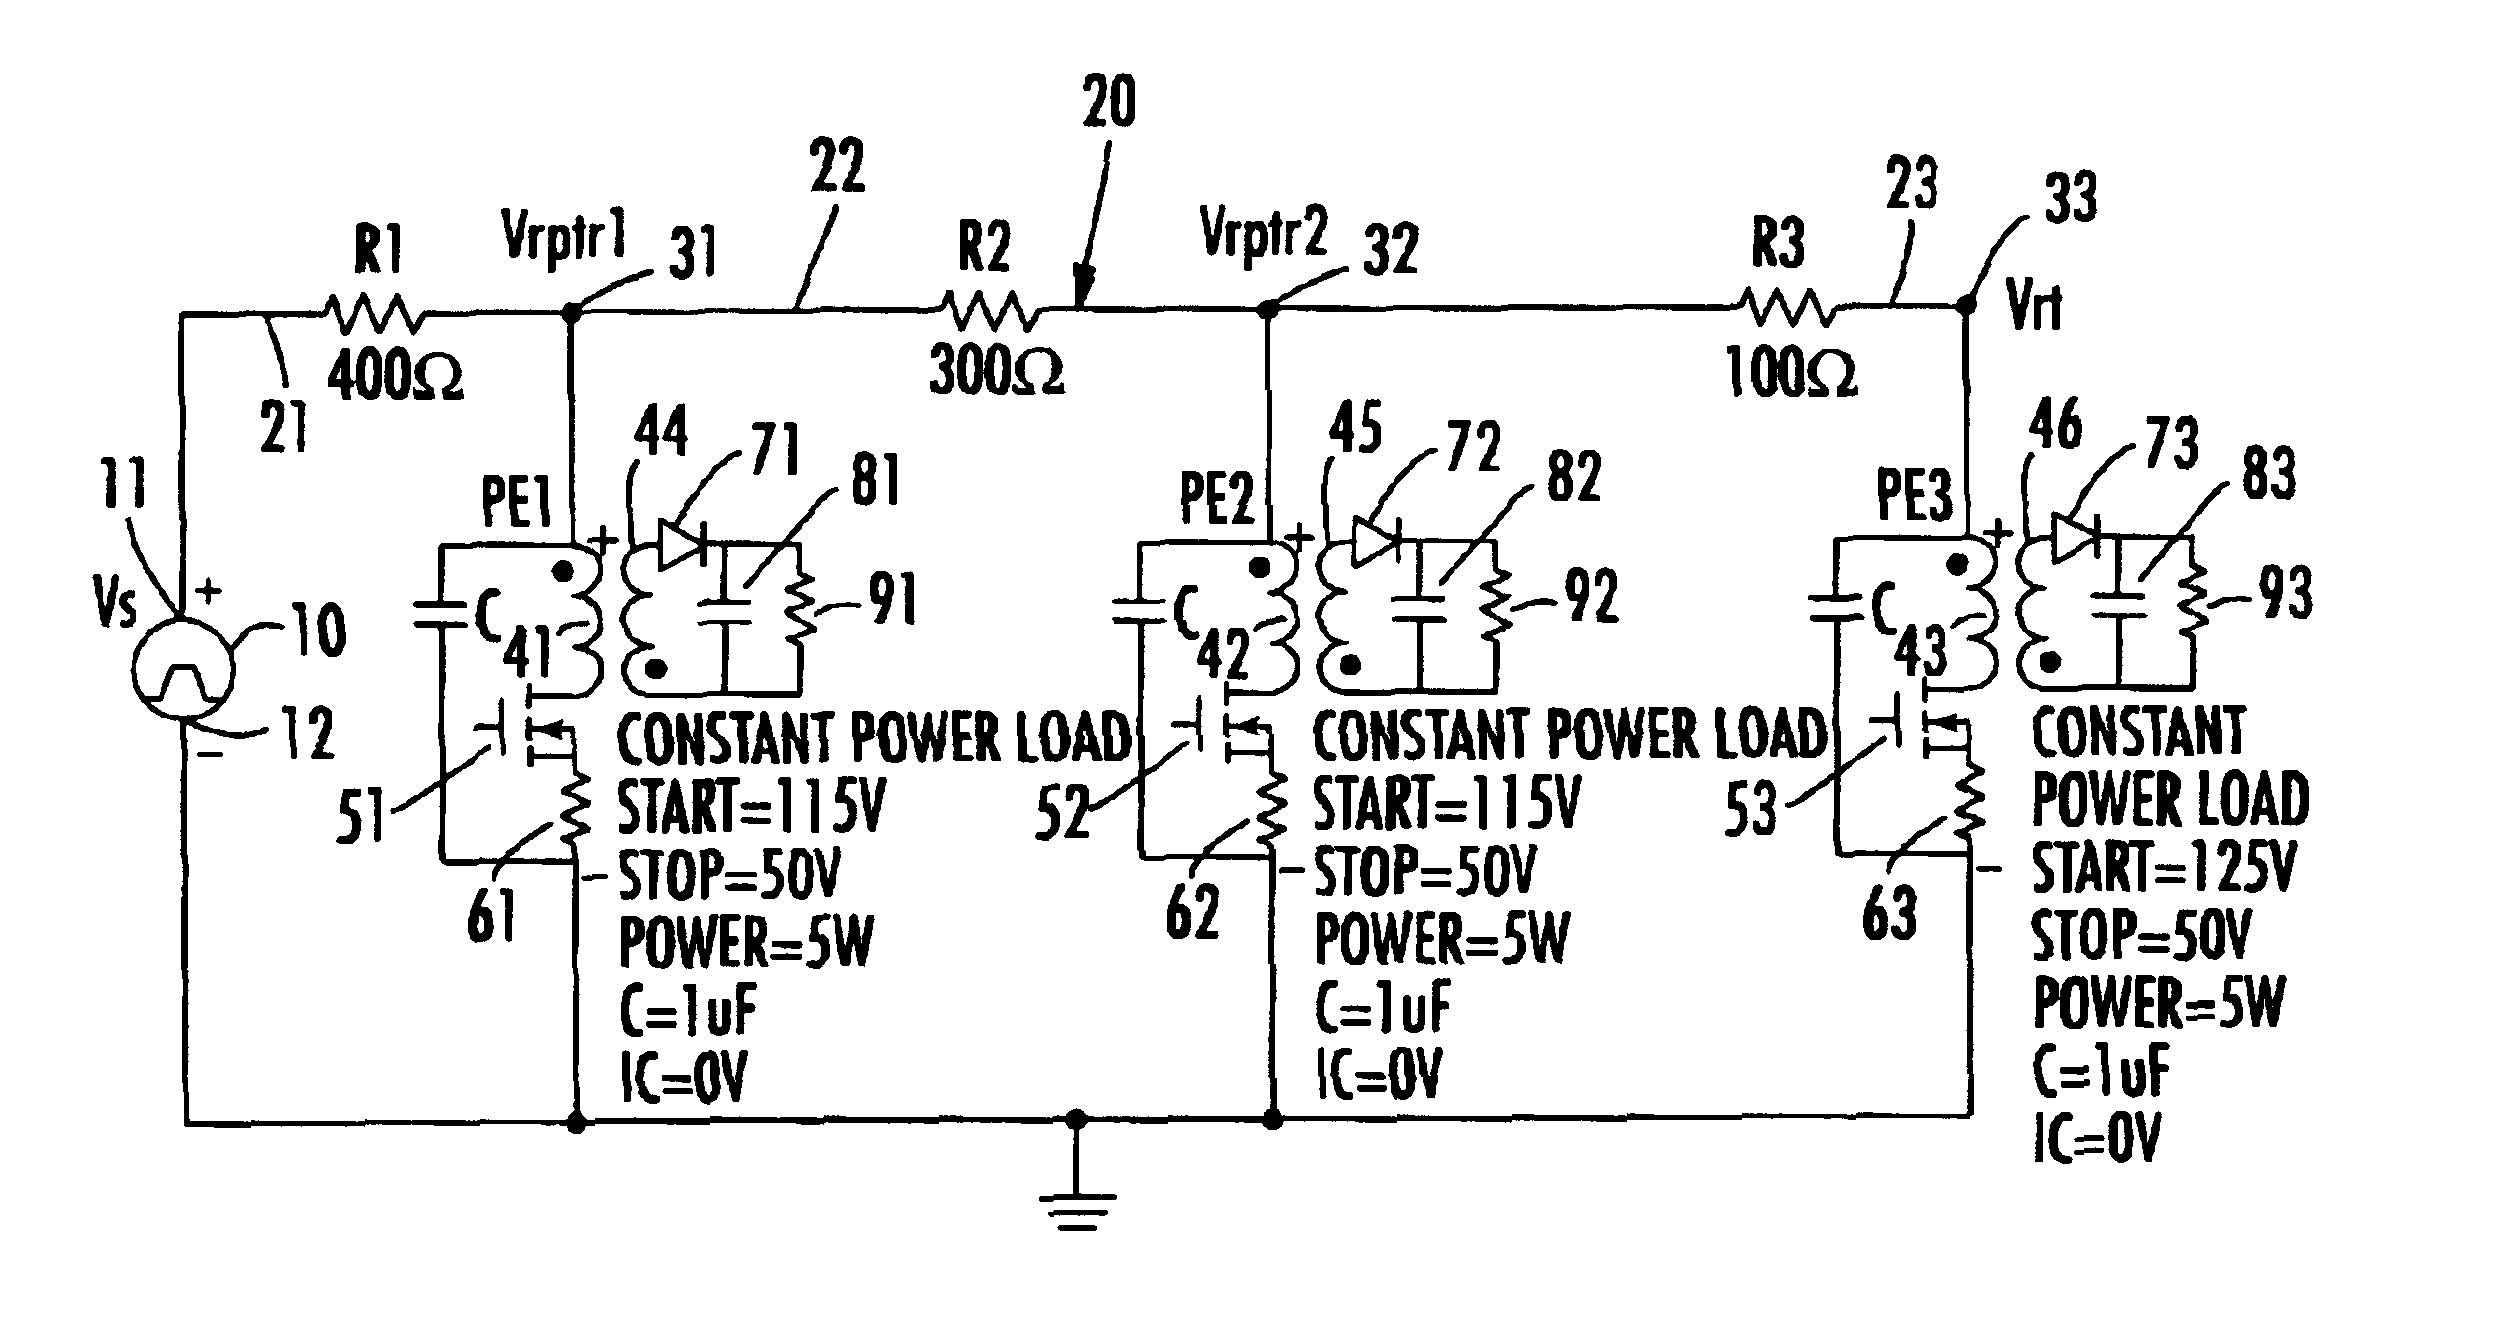 Method for assuring start-up of span-powered telecommunication systems